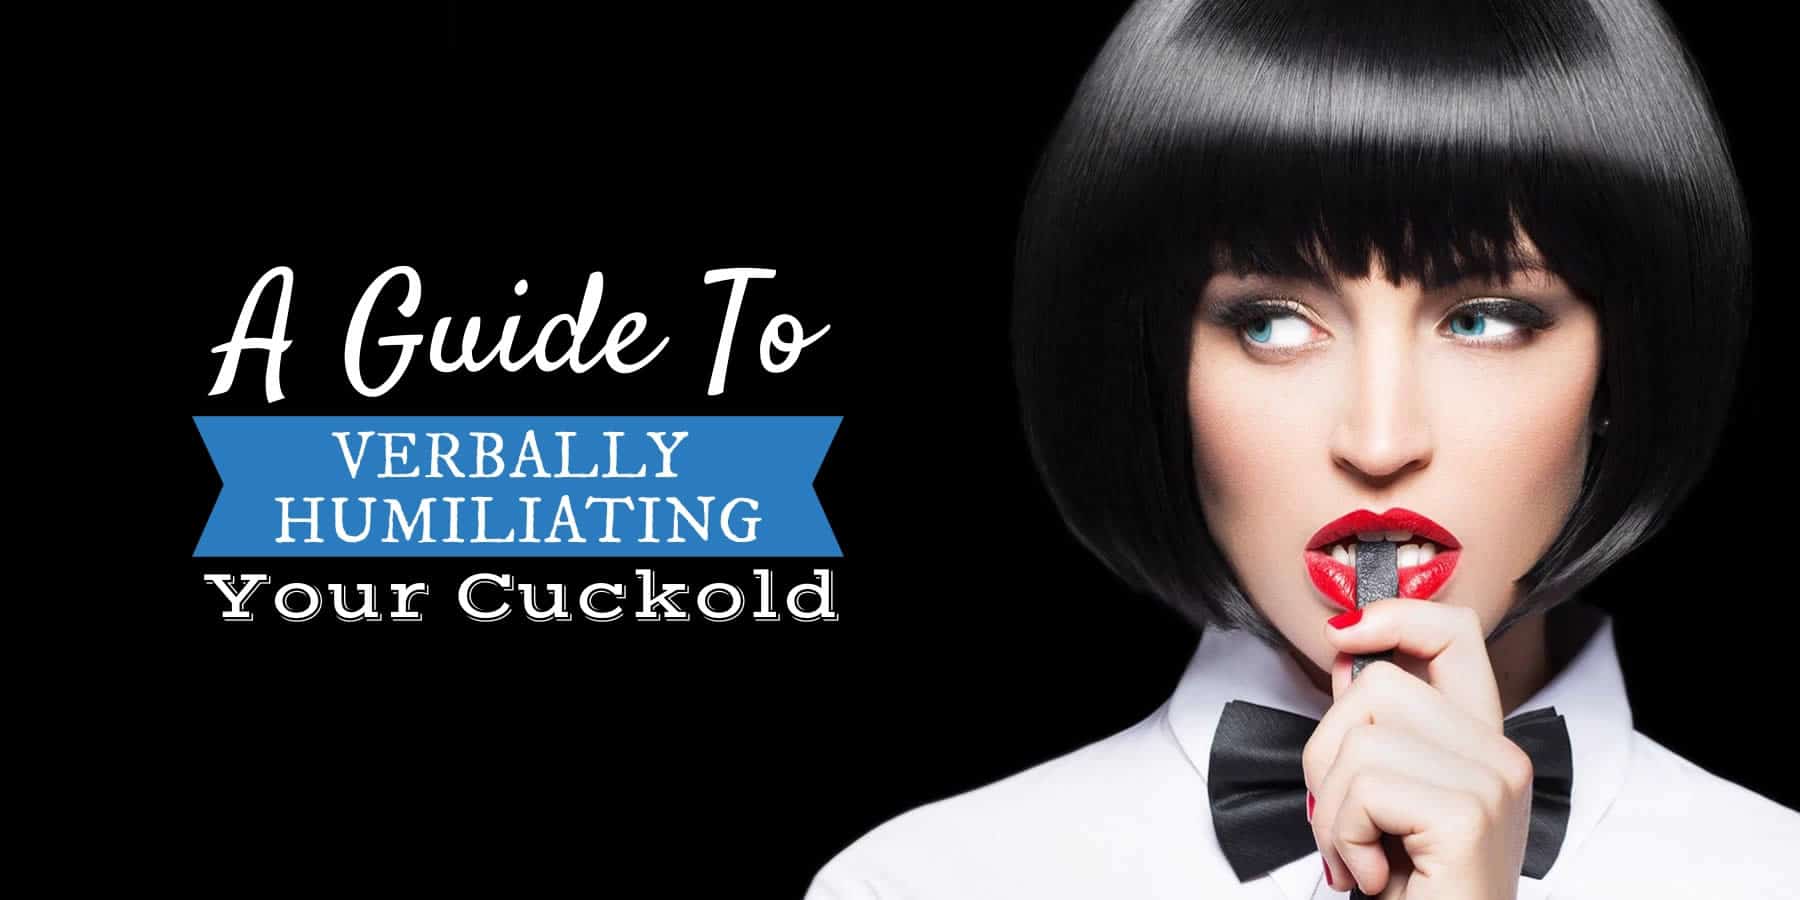 A Guide to Verbally Humiliating Your Cuckold (with Examples)